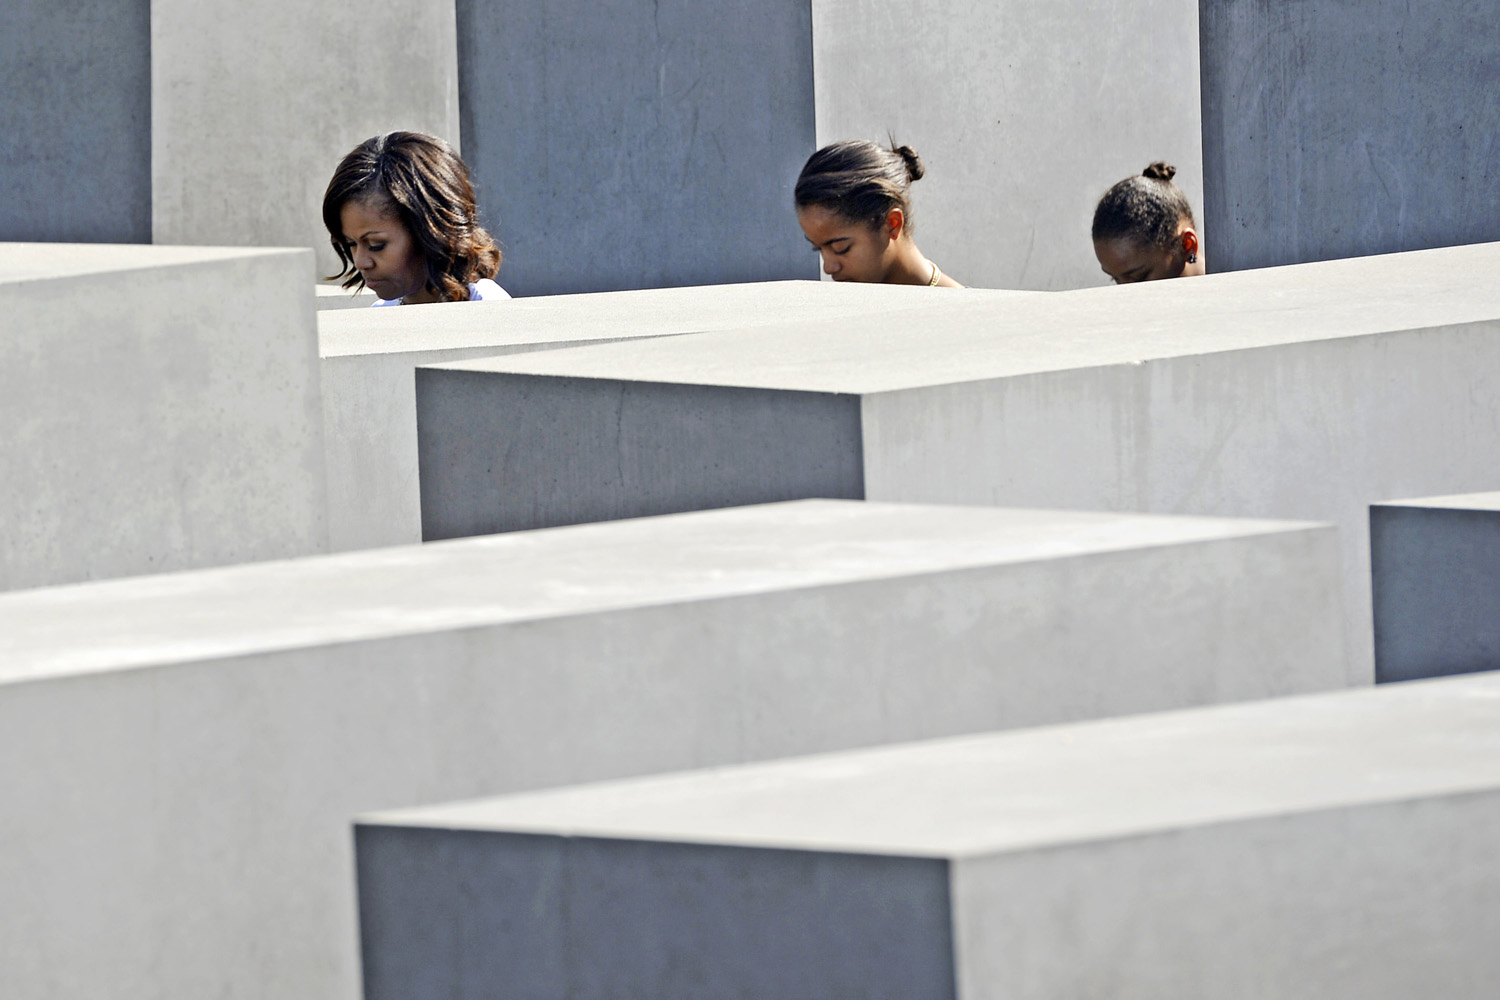 U.S. first lady Michelle Obama and her daughters Malia and Sasha visit the Holocaust Memorial in Berlin